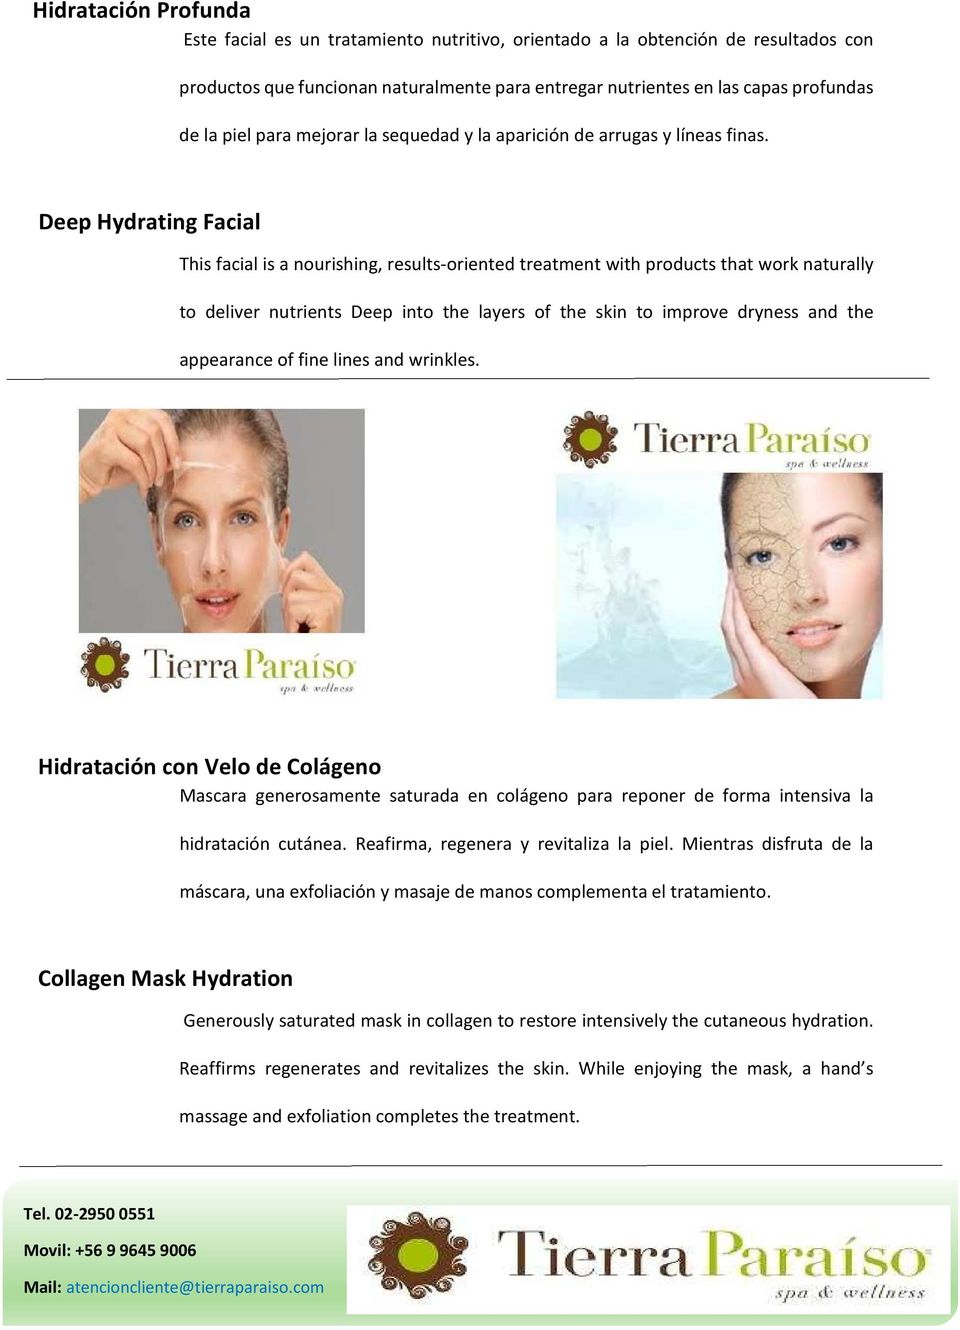 Deep Hydrating Facial This facial is a nourishing, results-oriented treatment with products that work naturally to deliver nutrients Deep into the layers of the skin to improve dryness and the